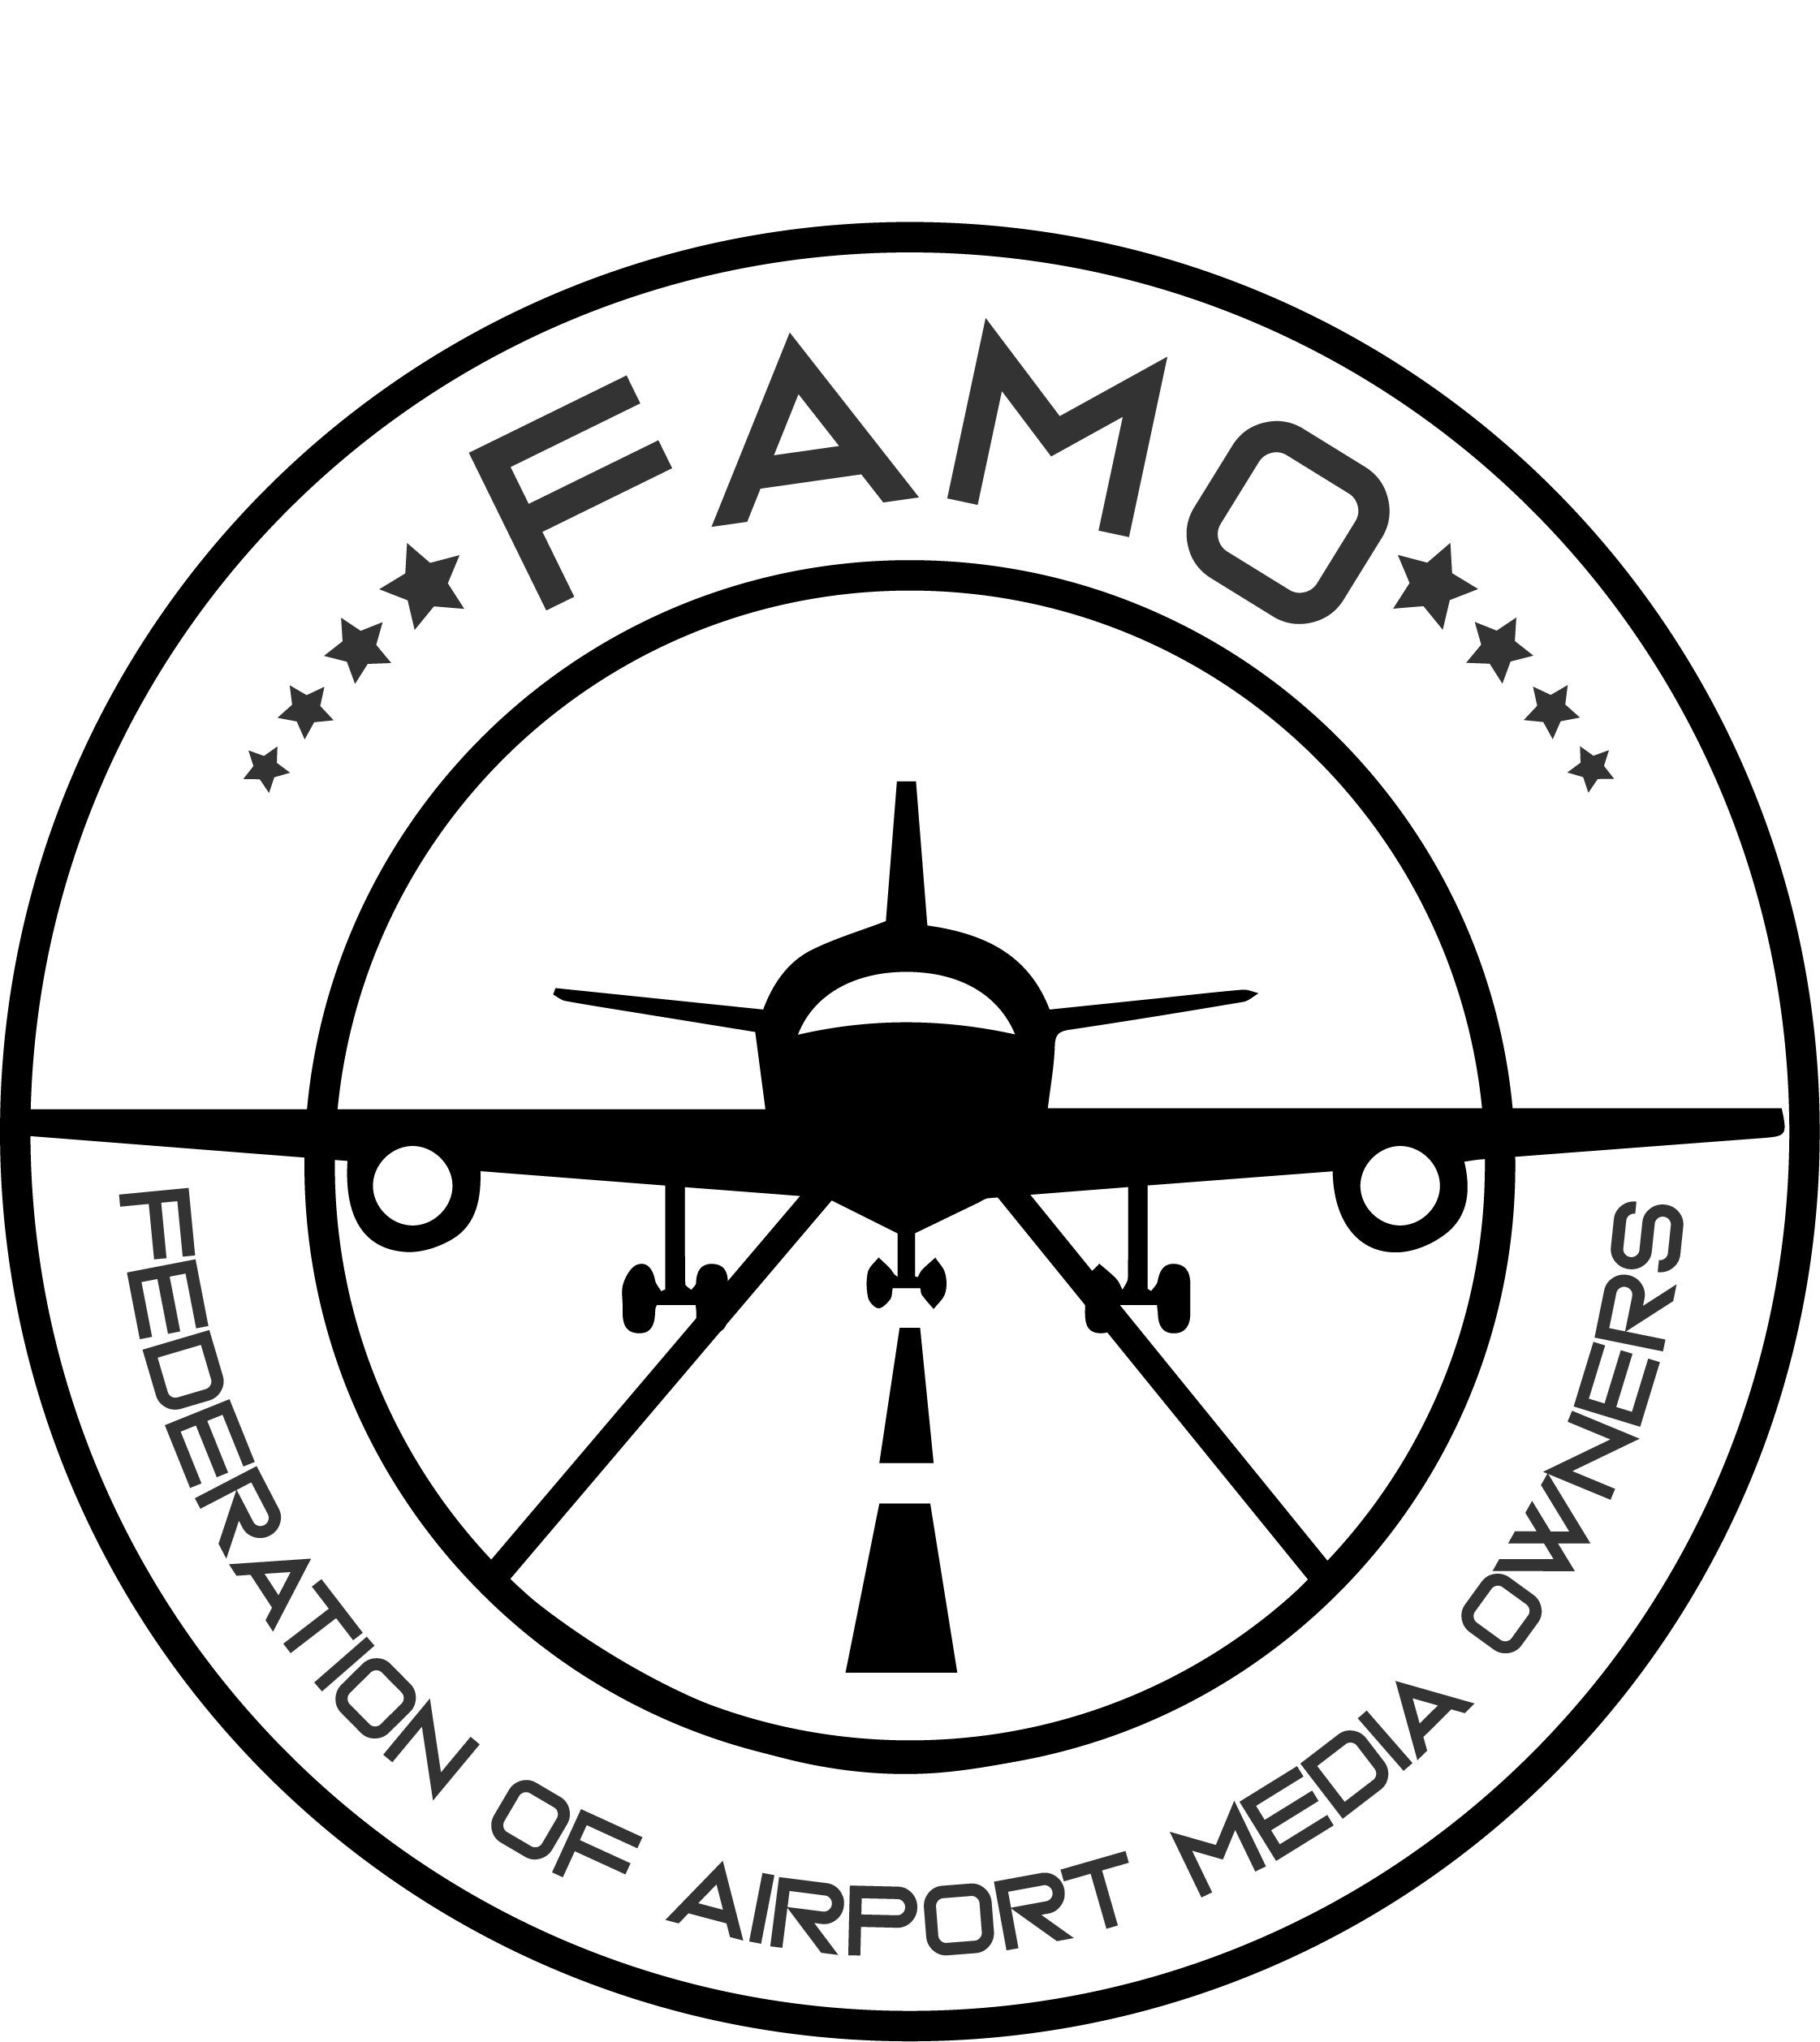 federation of airport media owners famo